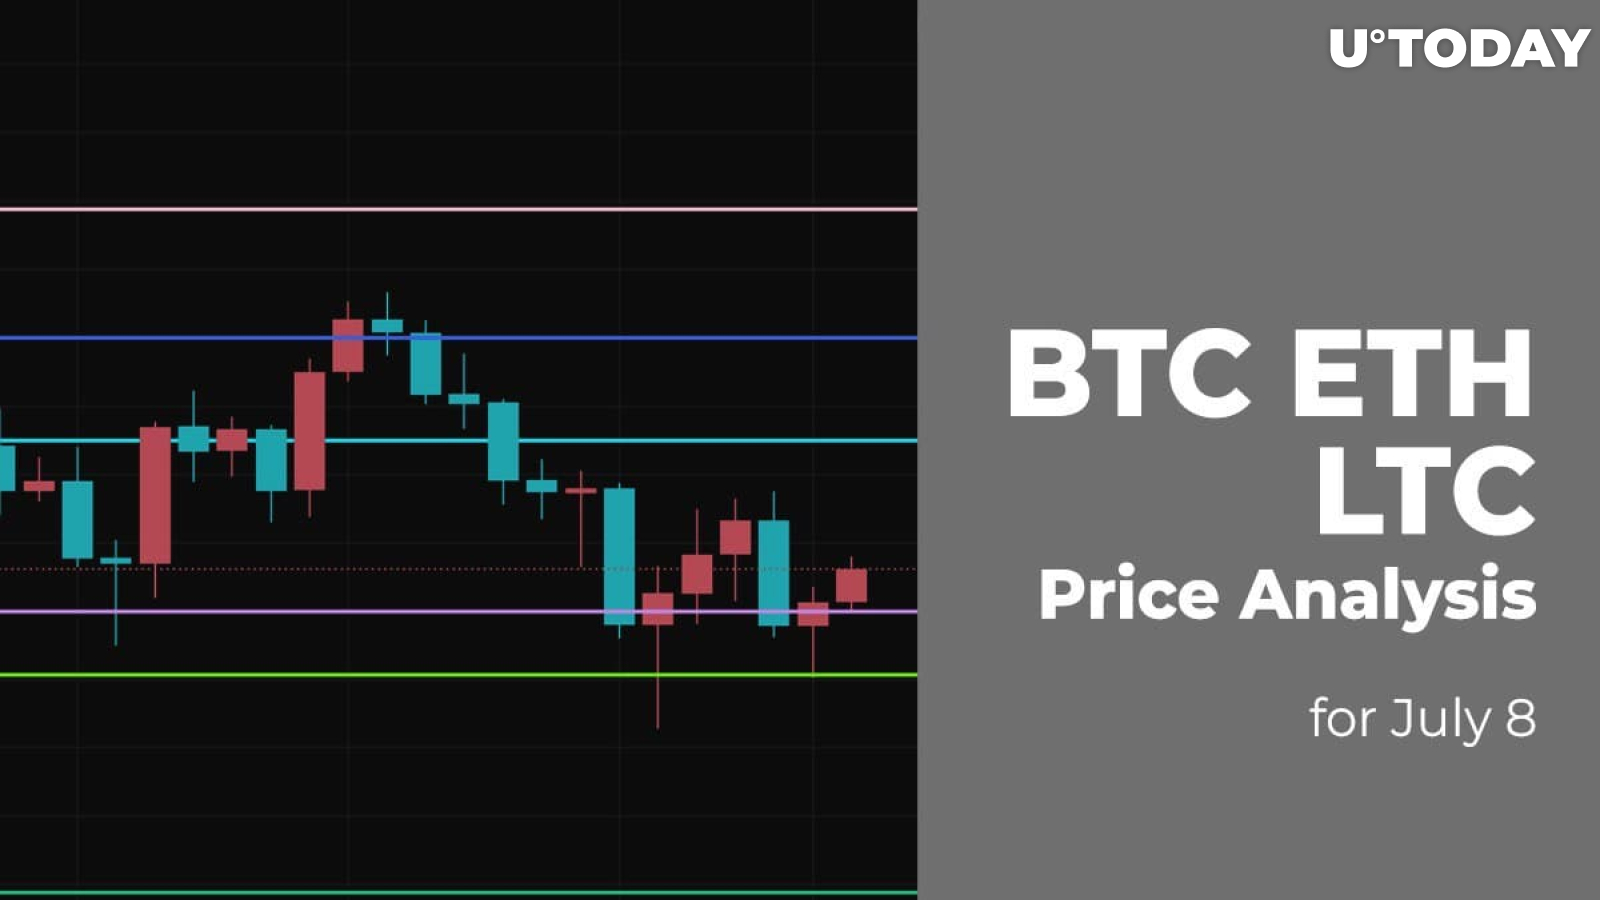 BTC, ETH, and LTC Price Analysis for July 8